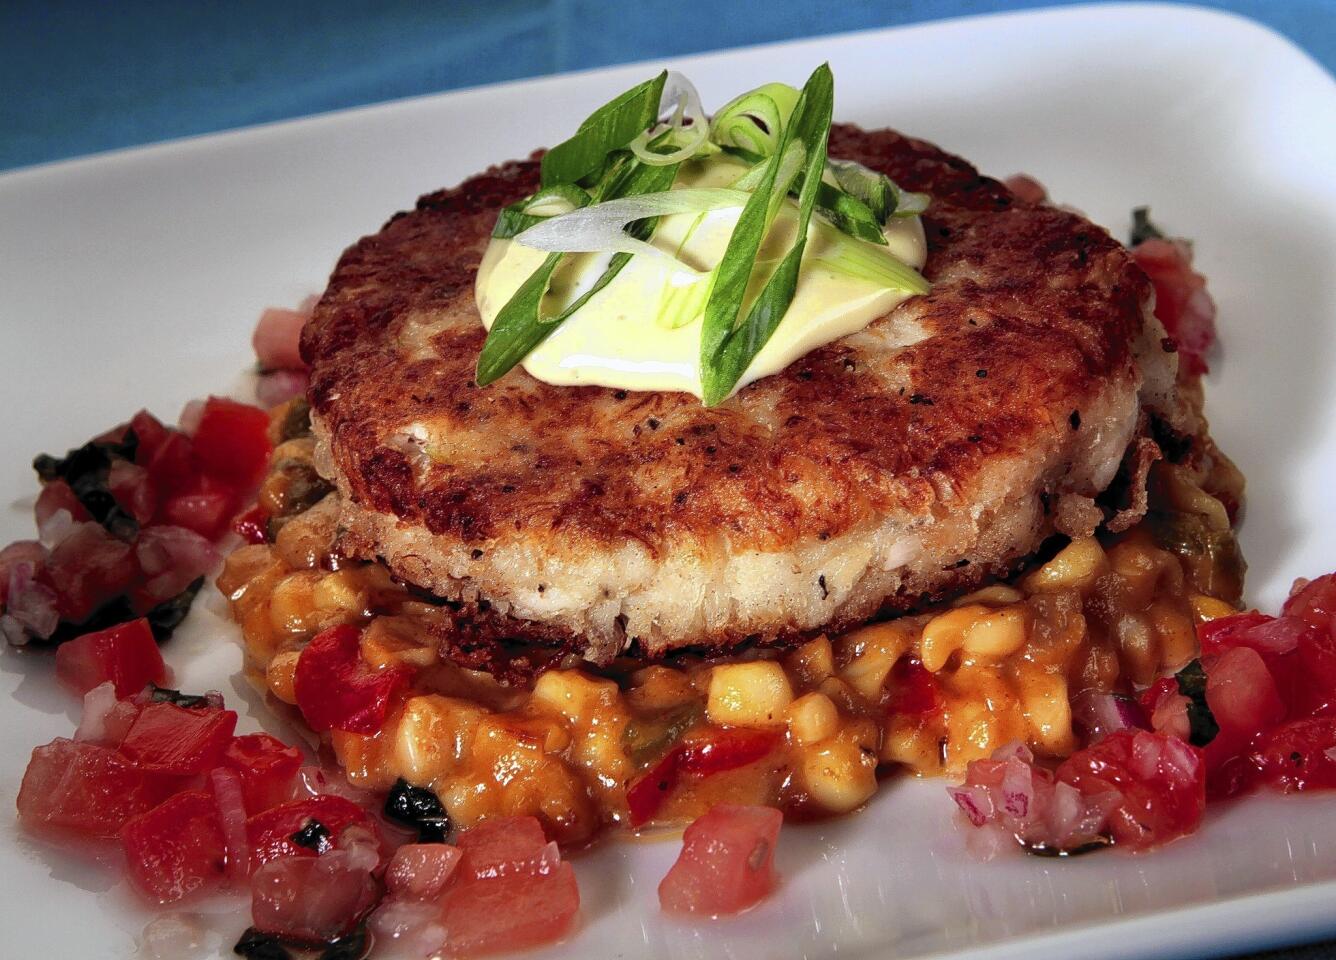 Red Fish Grill's crab cakes